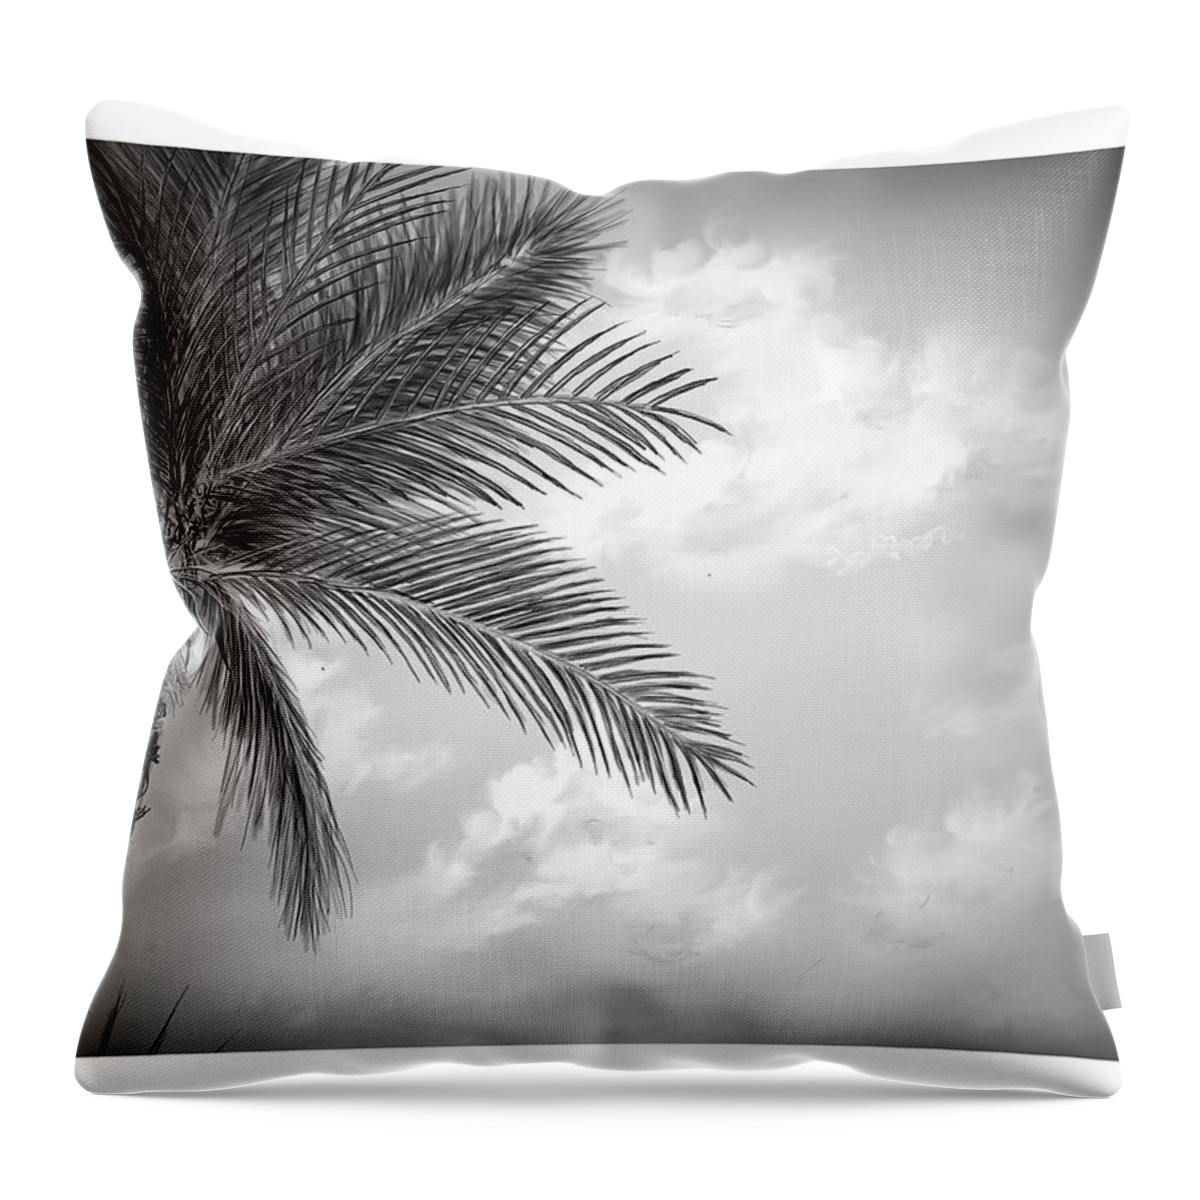 Cloud Throw Pillow featuring the digital art Black and white palm by Darren Cannell